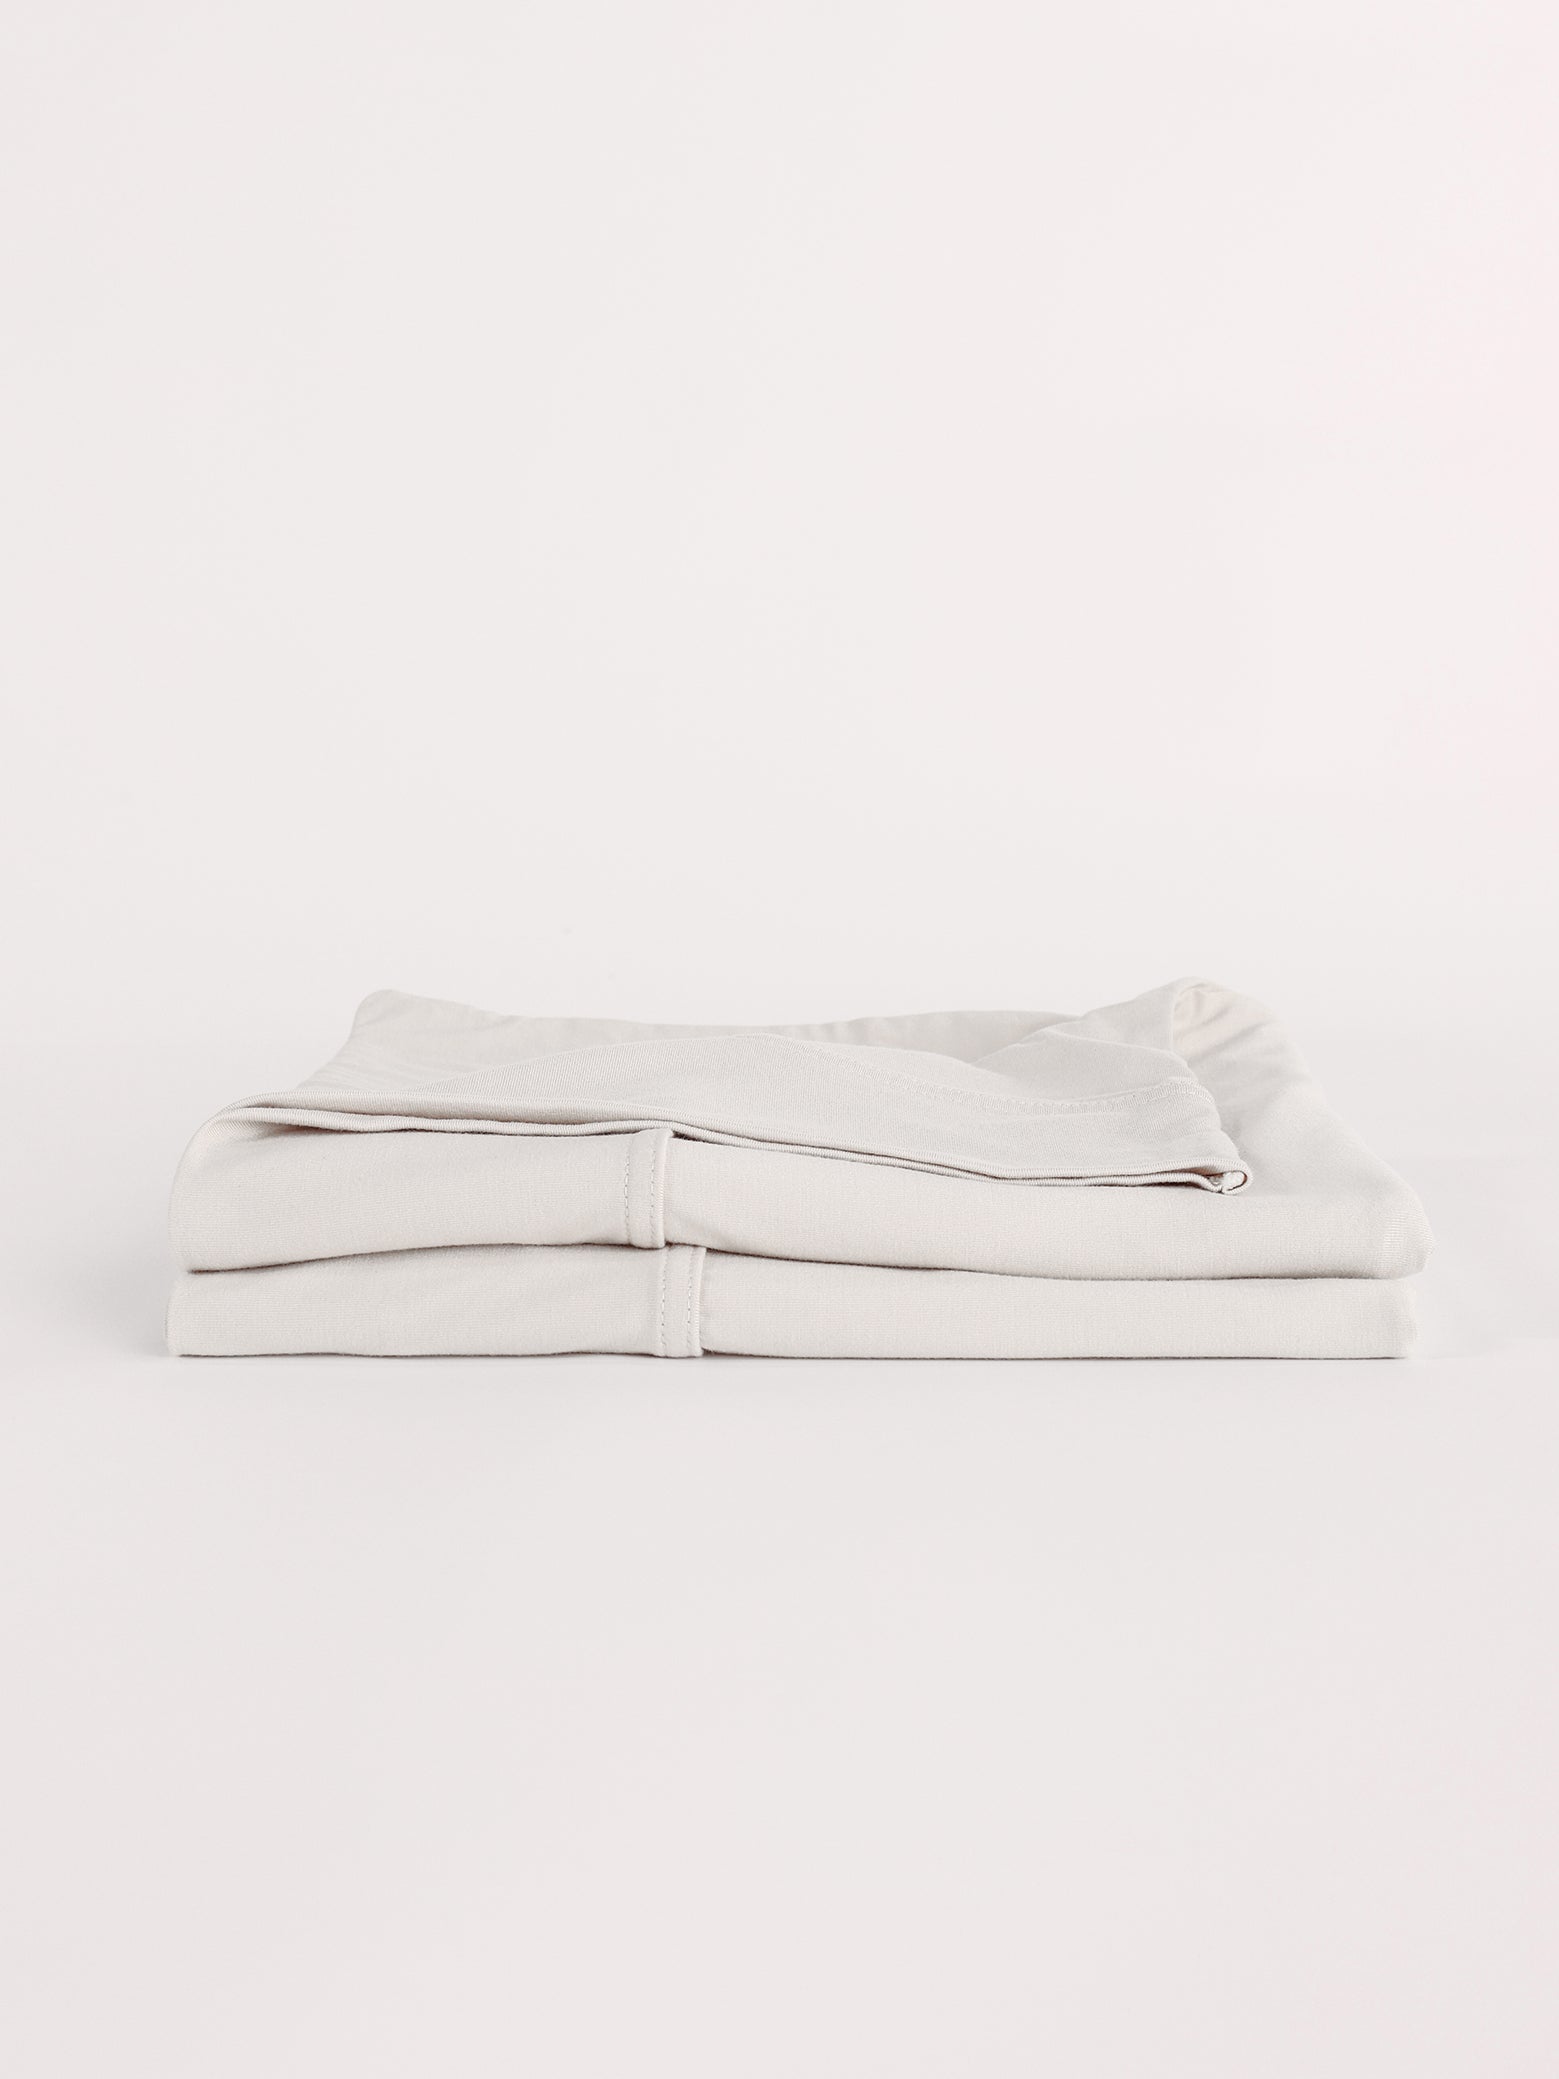 Light grey pillowcases folded with white background 